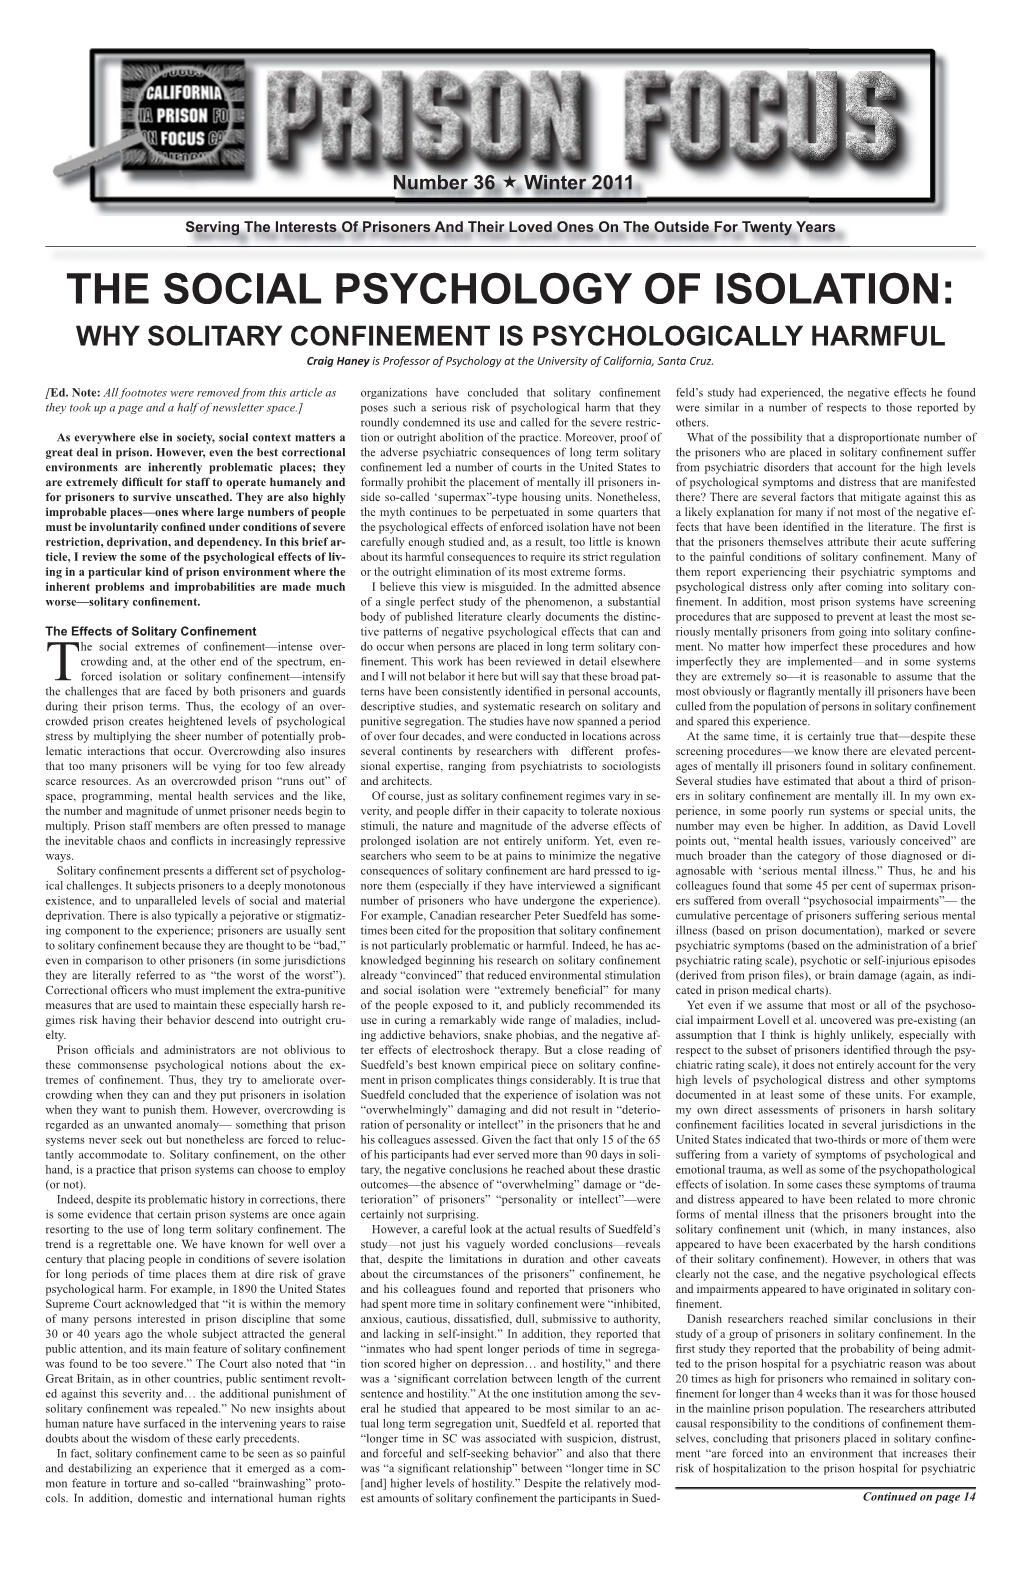 The Social Psychology of Isolation